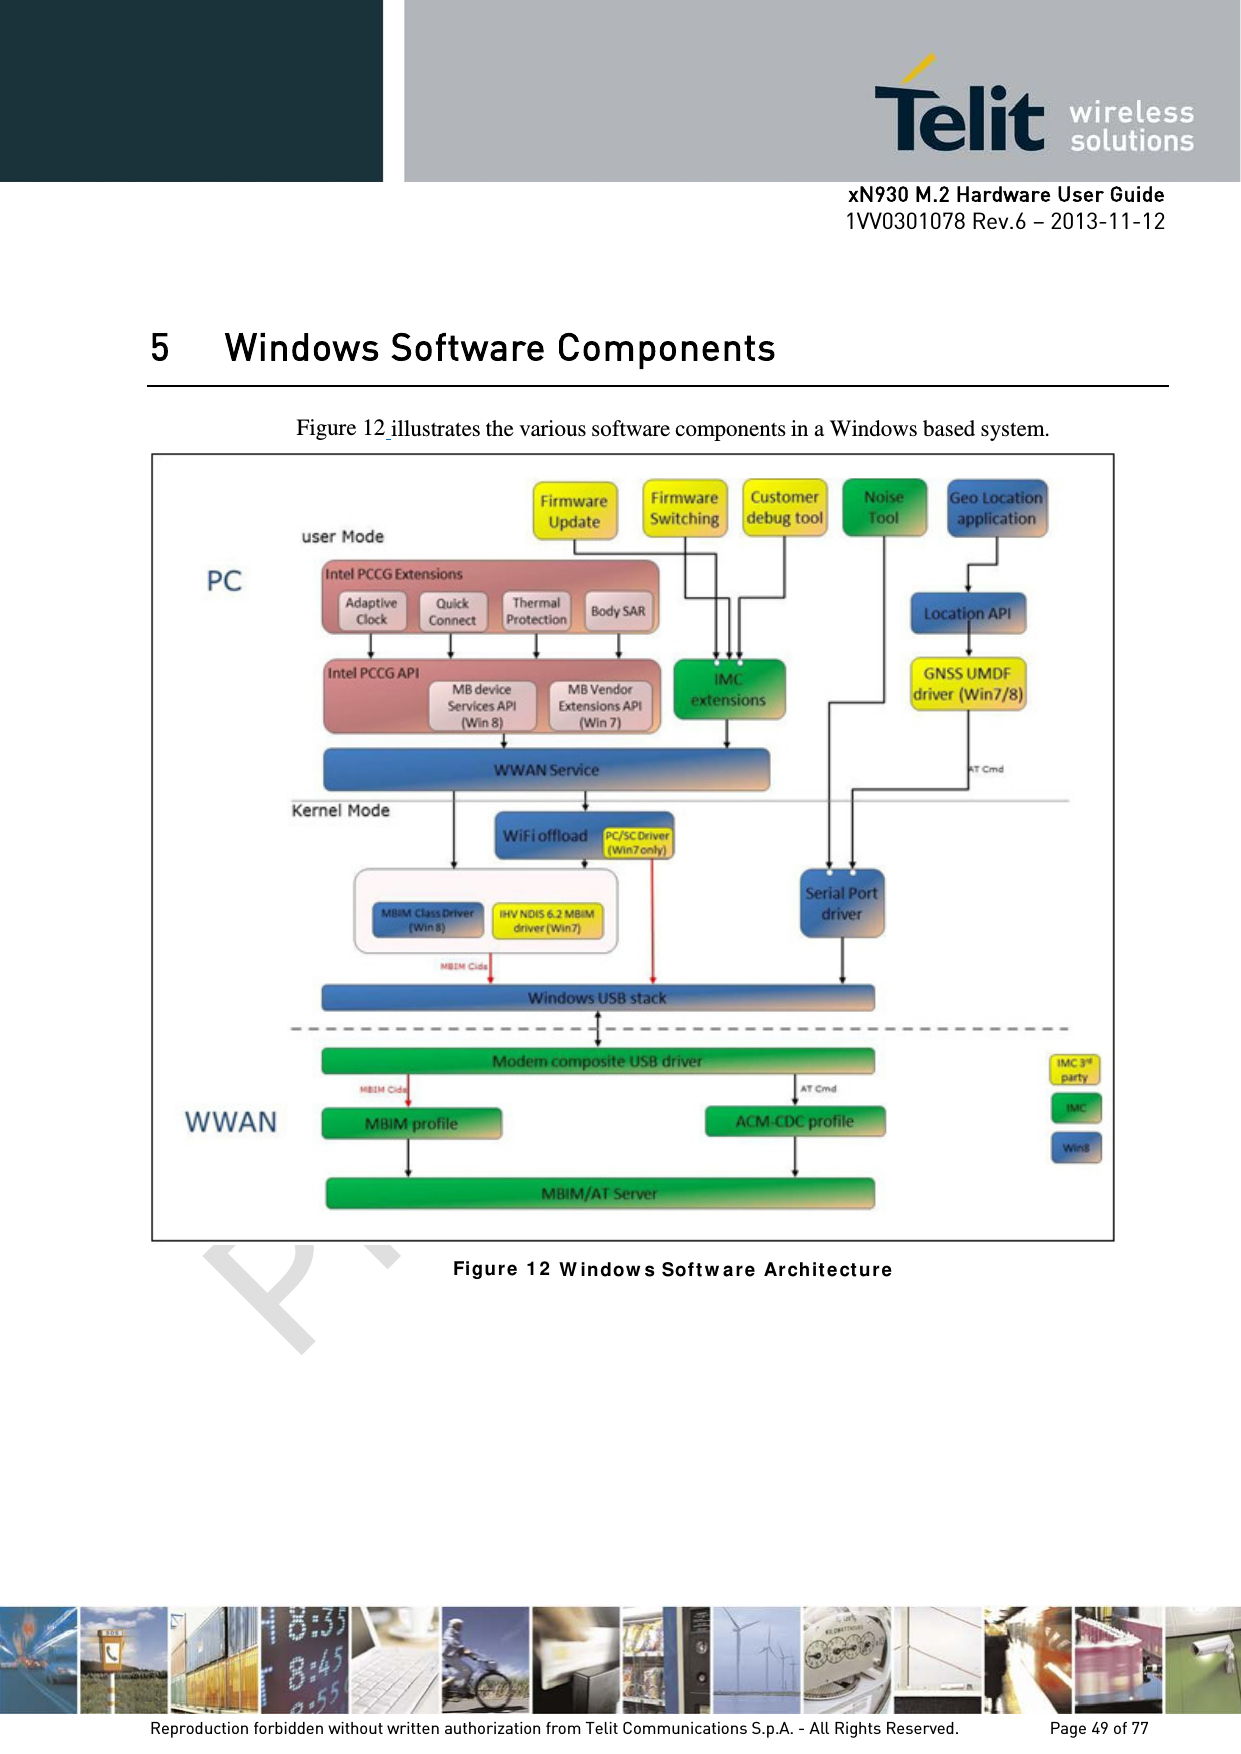      xN930 M.2 Hardware User Guide 1VV0301078 Rev.6 – 2013-11-12    5 Windows Software Components  Figure 12 illustrates the various software components in a Windows based system.  Figur e 1 2  W indow s Soft w ar e Ar chit e ct u re   Reproduction forbidden without written authorization from Telit Communications S.p.A. - All Rights Reserved.    Page 49 of 77 